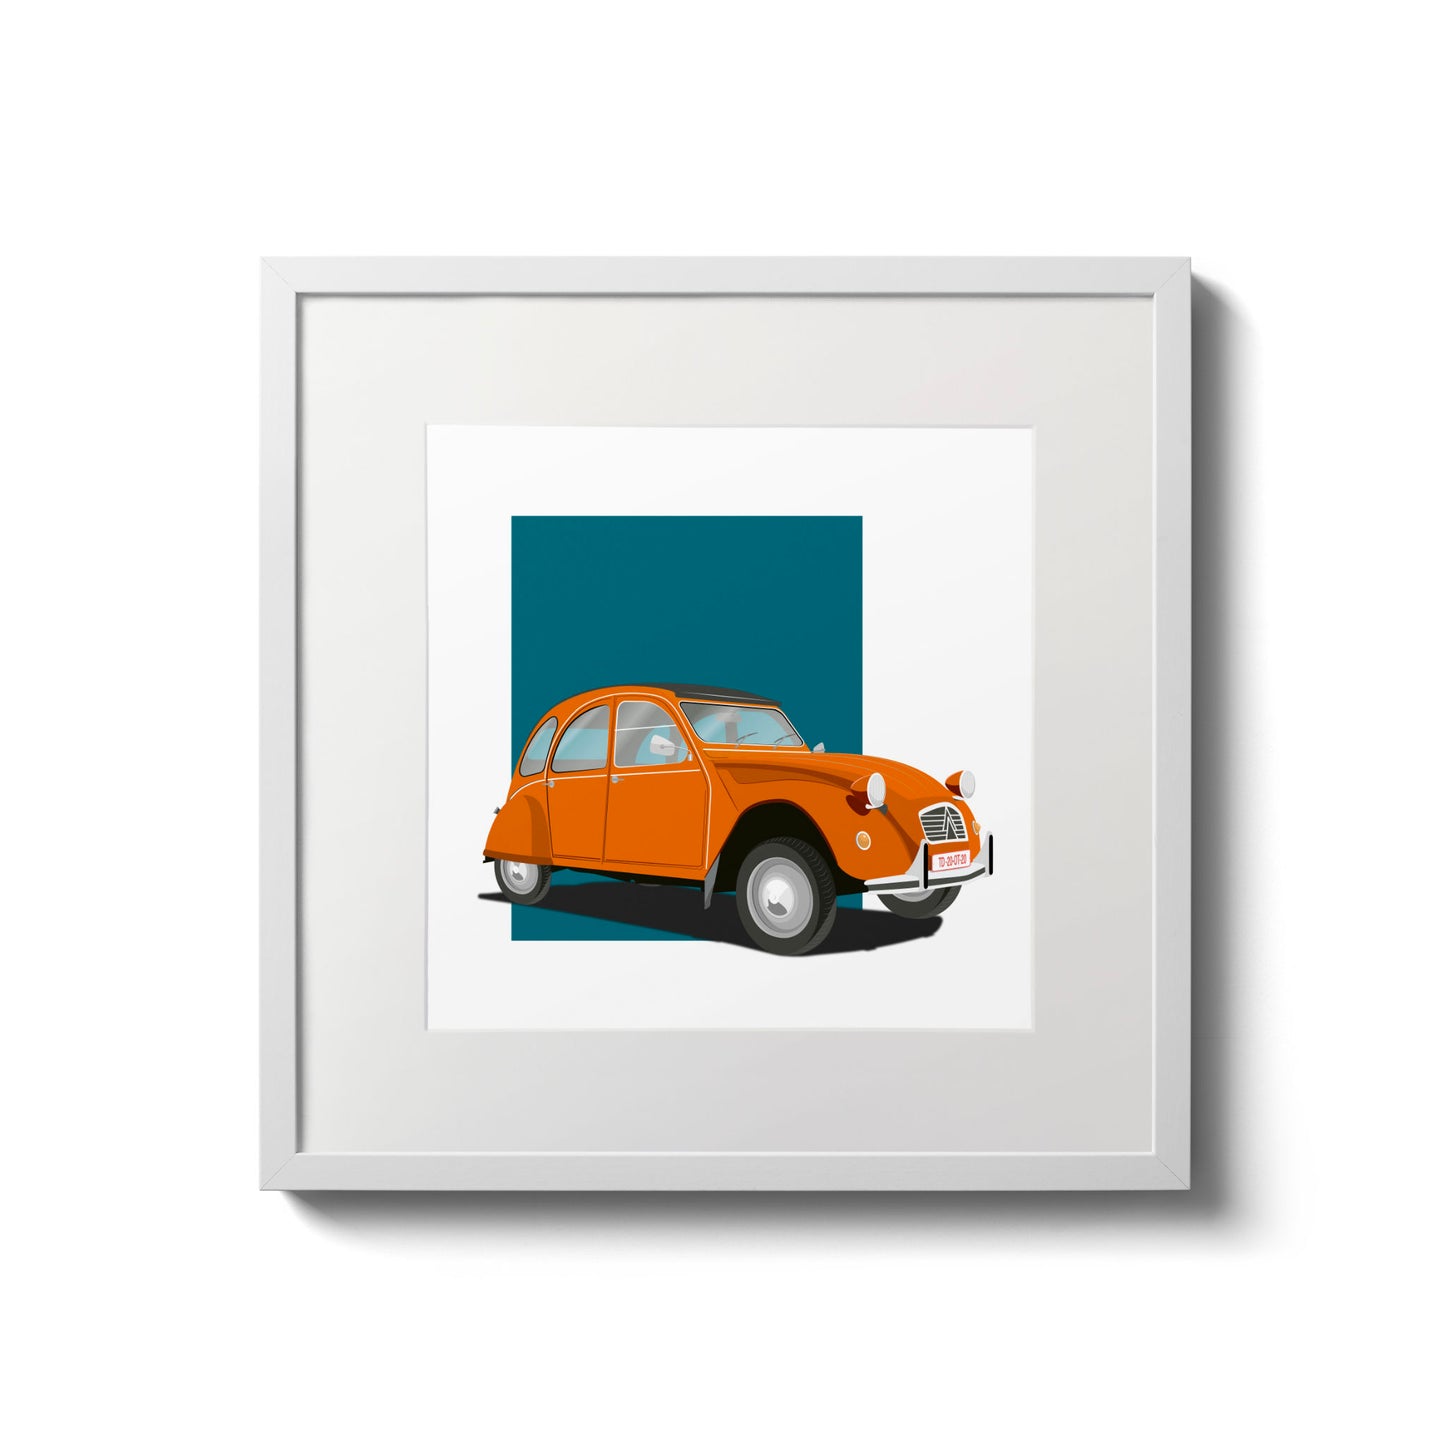 Illustration of an orange Citroën 2CV, in a white frame and measuring 20 by 20 cm